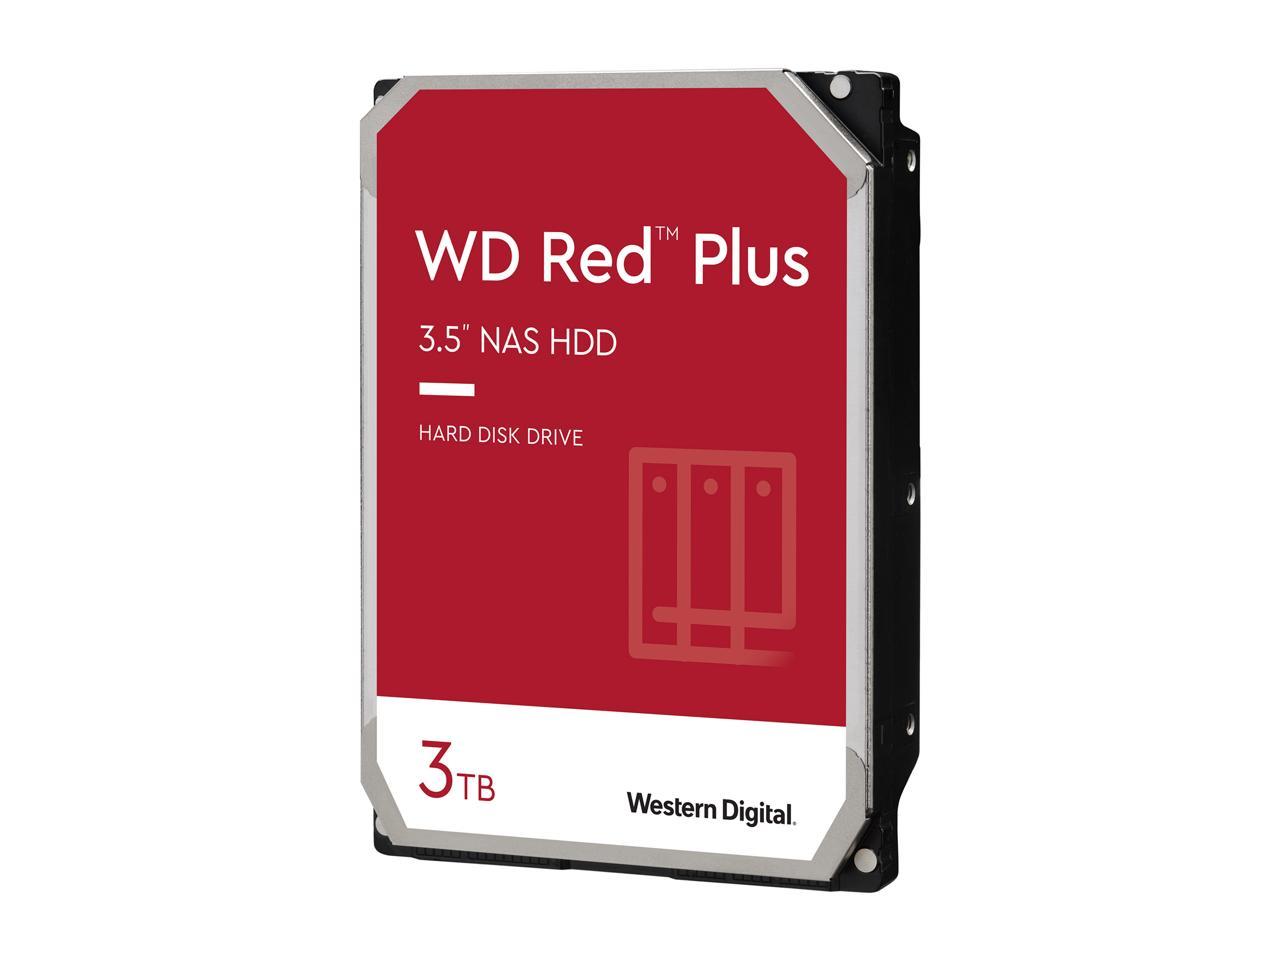 Wd Red Plus 3Tb Nas Hard Disk Drive - 5400 Rpm Class Sata 6Gb/S, Cmr, 128Mb Cache, 3.5 Inch - Wd30Efzx